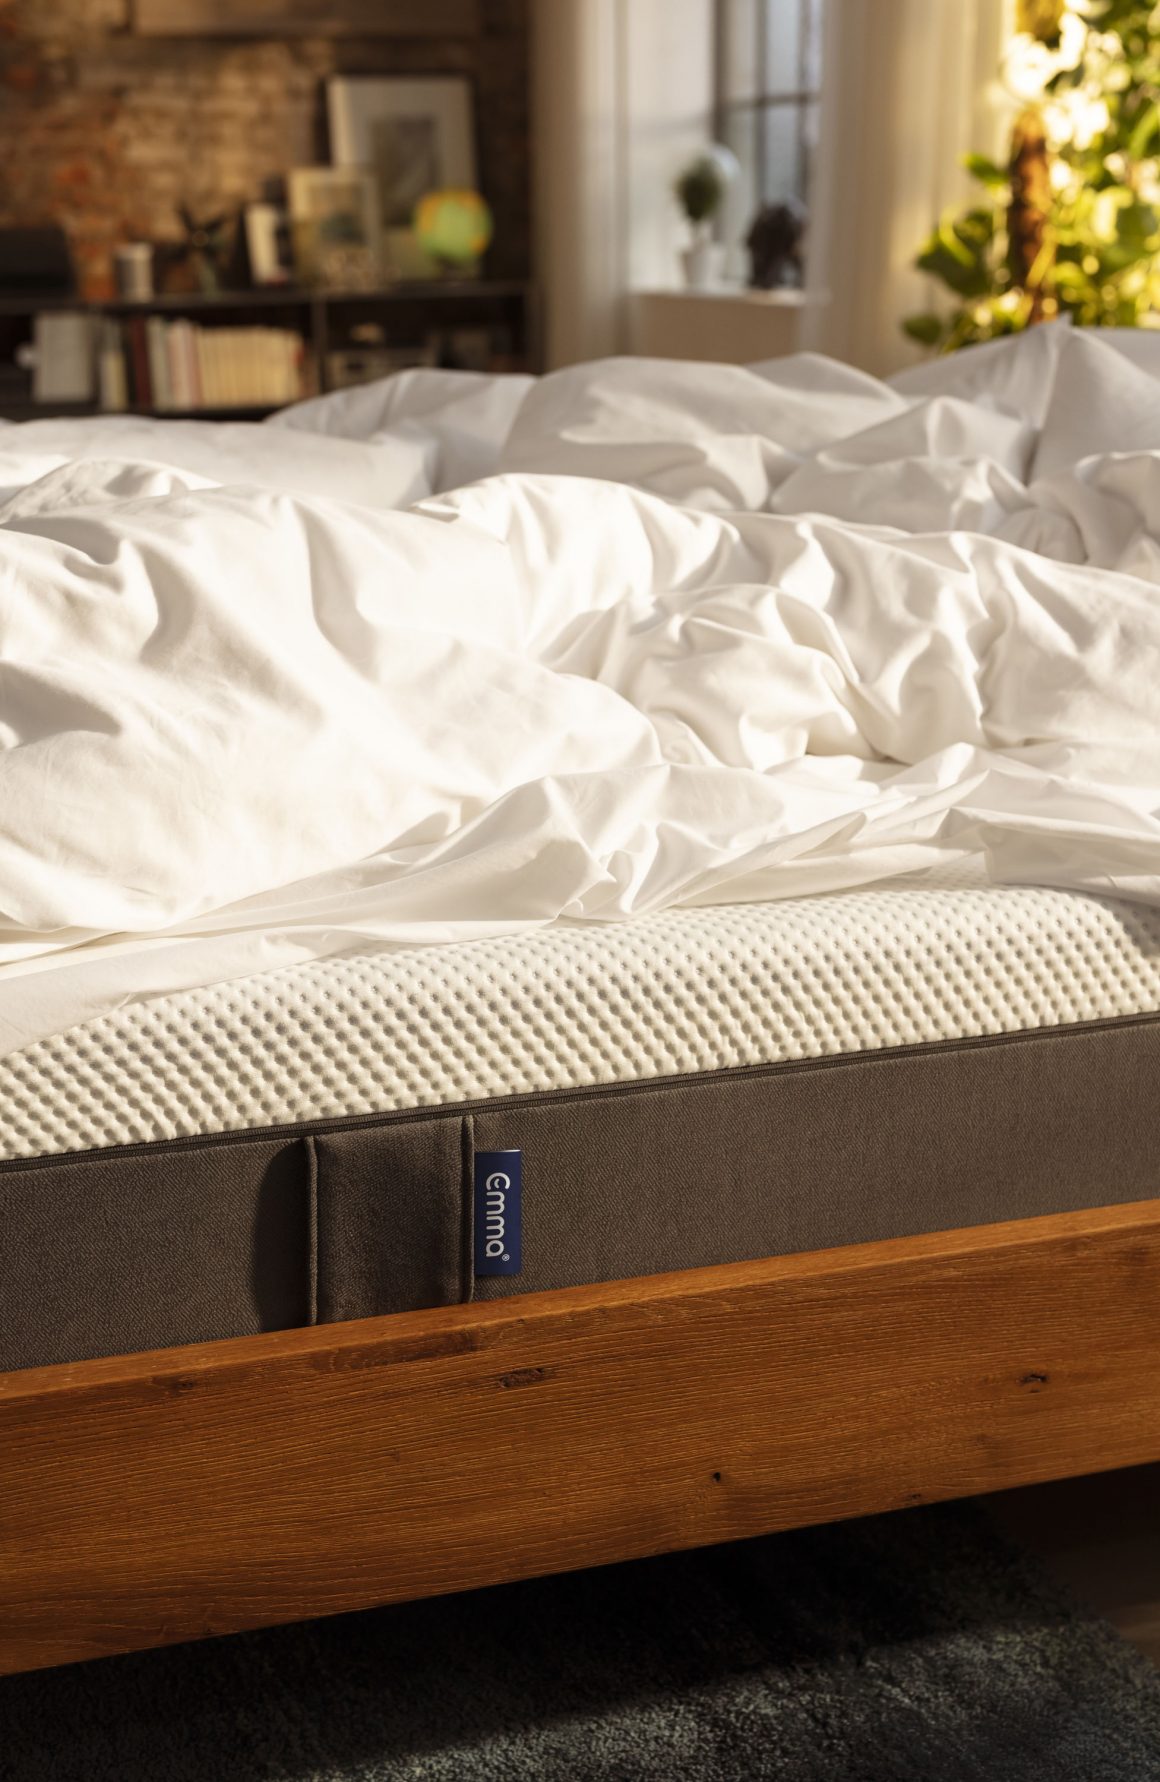 What's so special about The Emma Original Mattress?